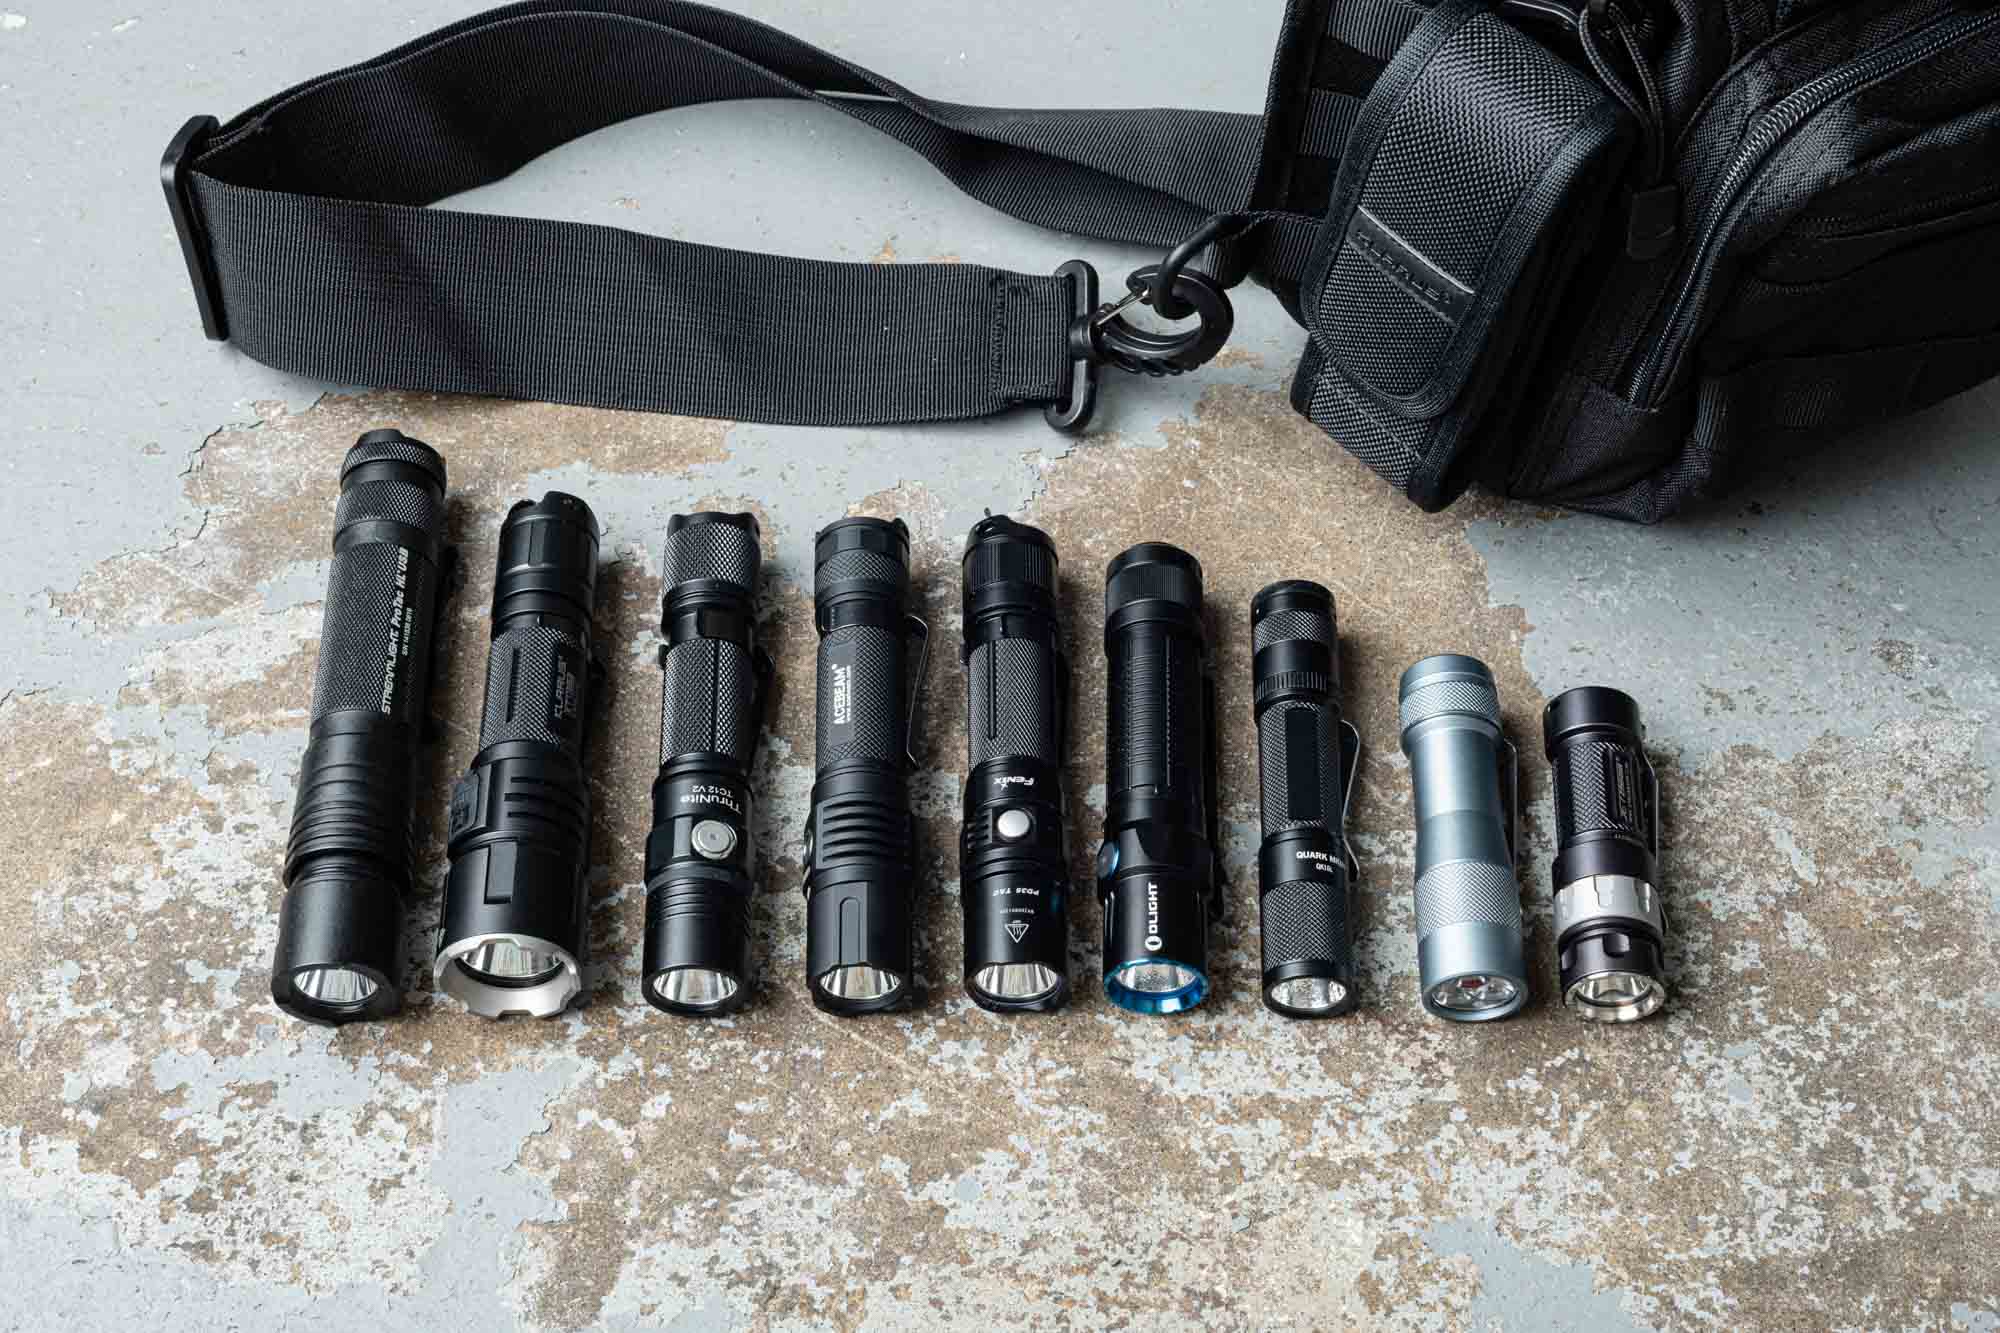 Top 5 Best Camping Flashlight in 2022 Reviews 